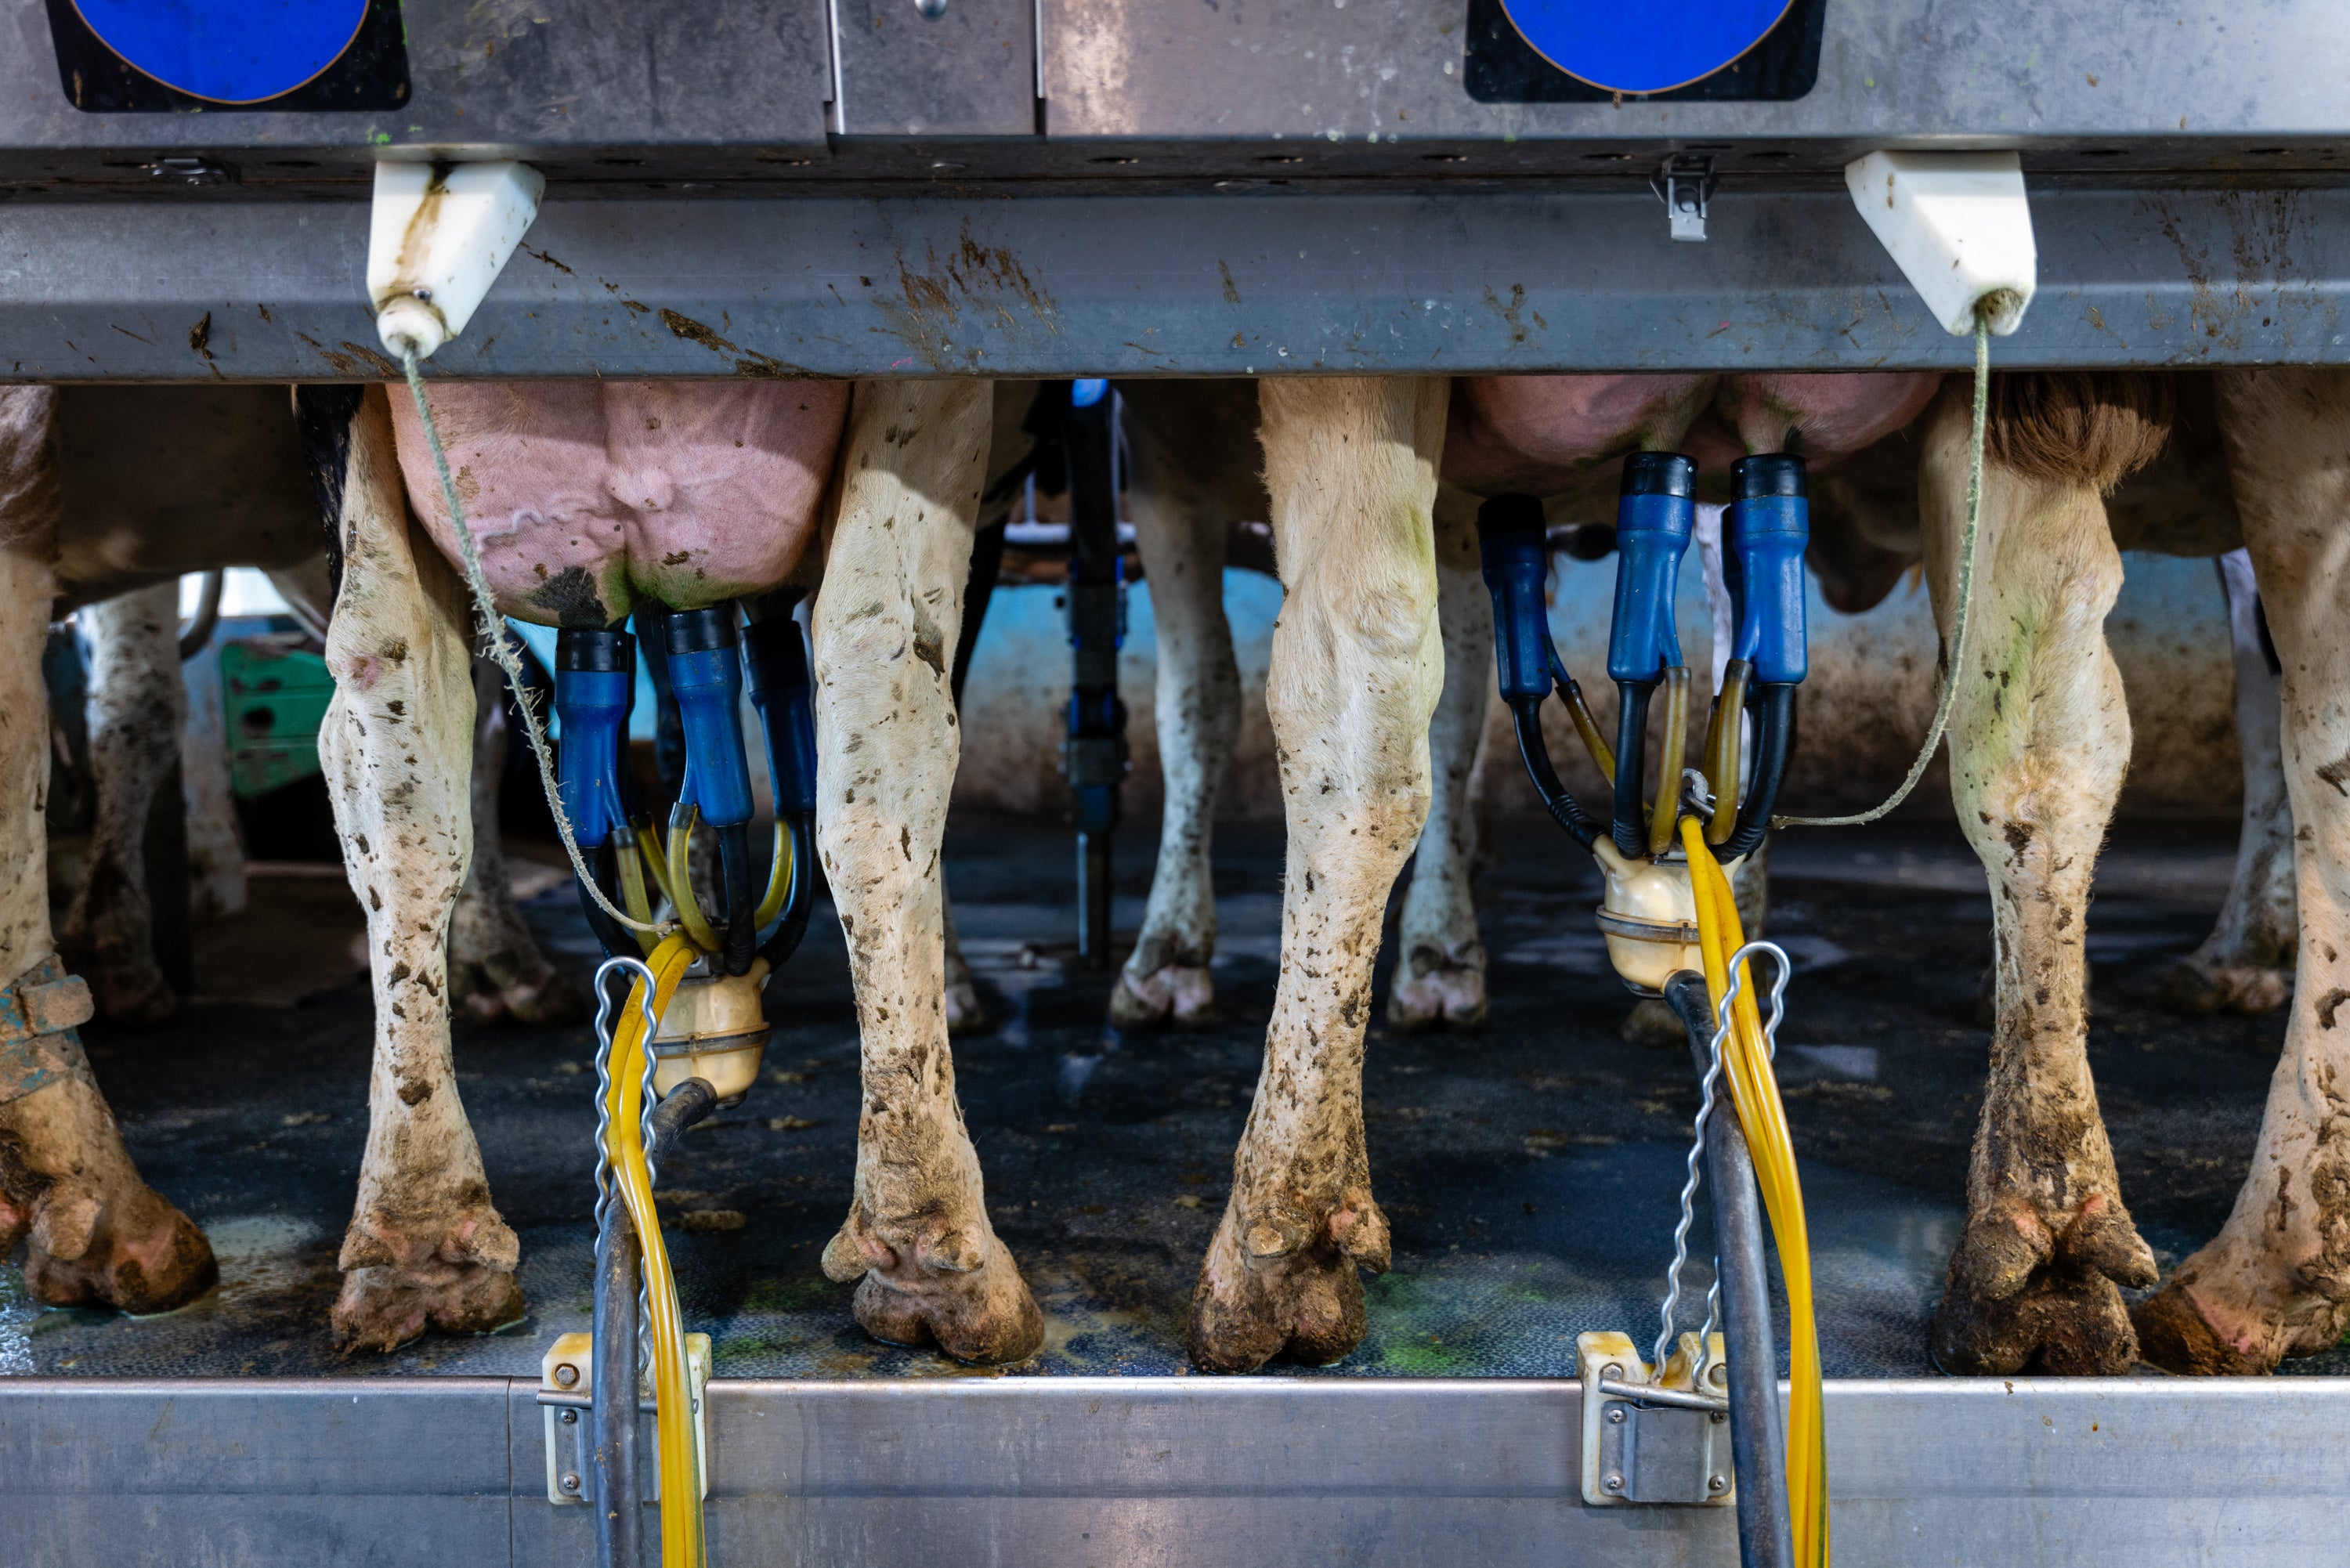 Photograph of cows being milked at a dairy farm, only their udders, rear feet, and milking equipment is visible